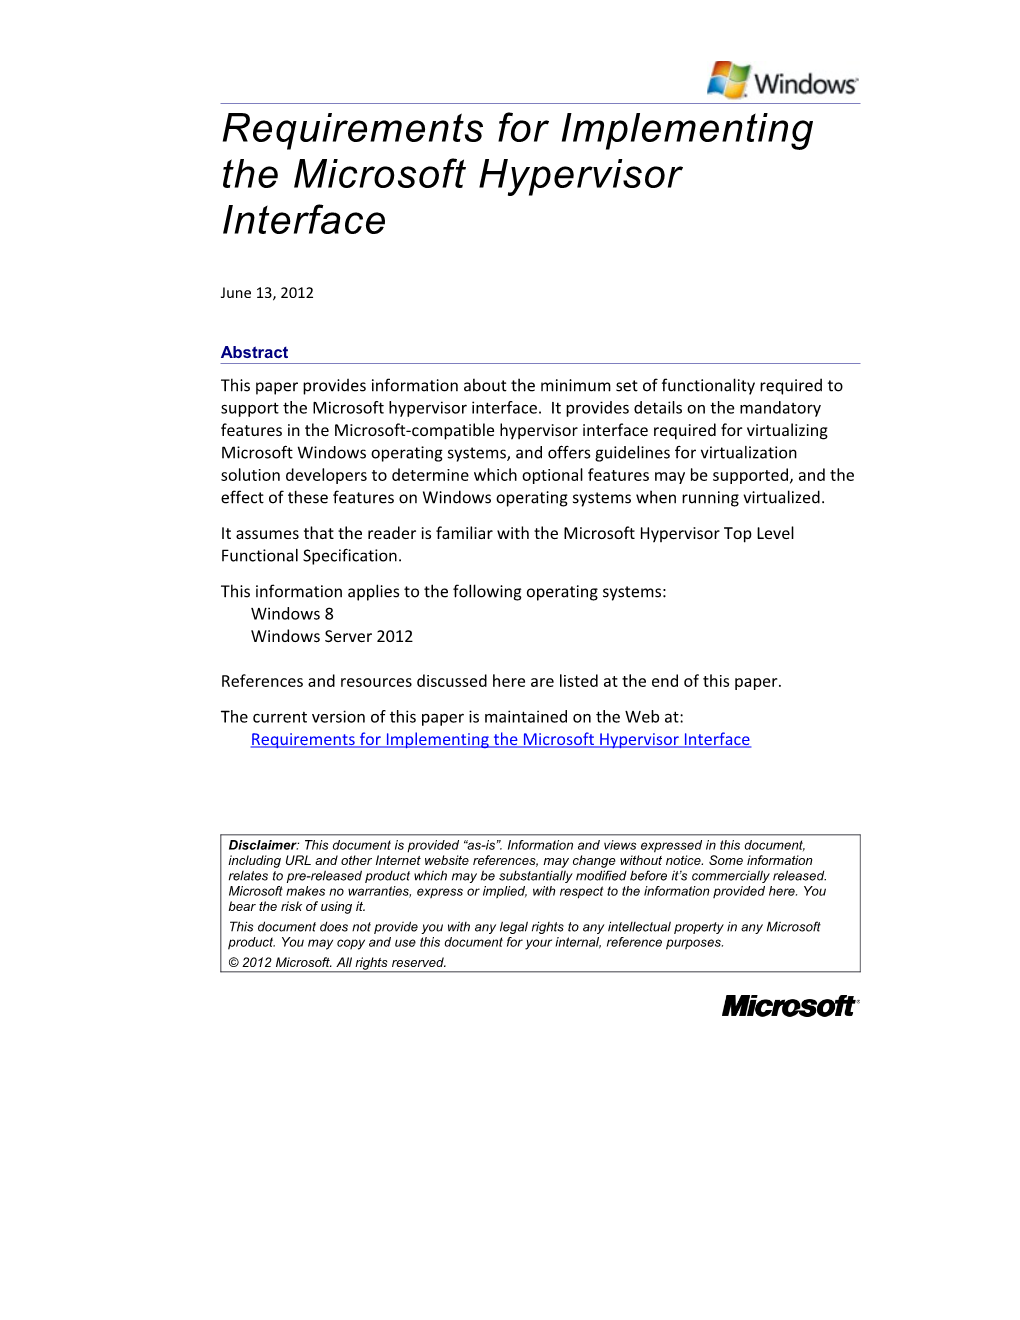 Requirements for Implementing the Microsoft Hypervisor Interface - 1